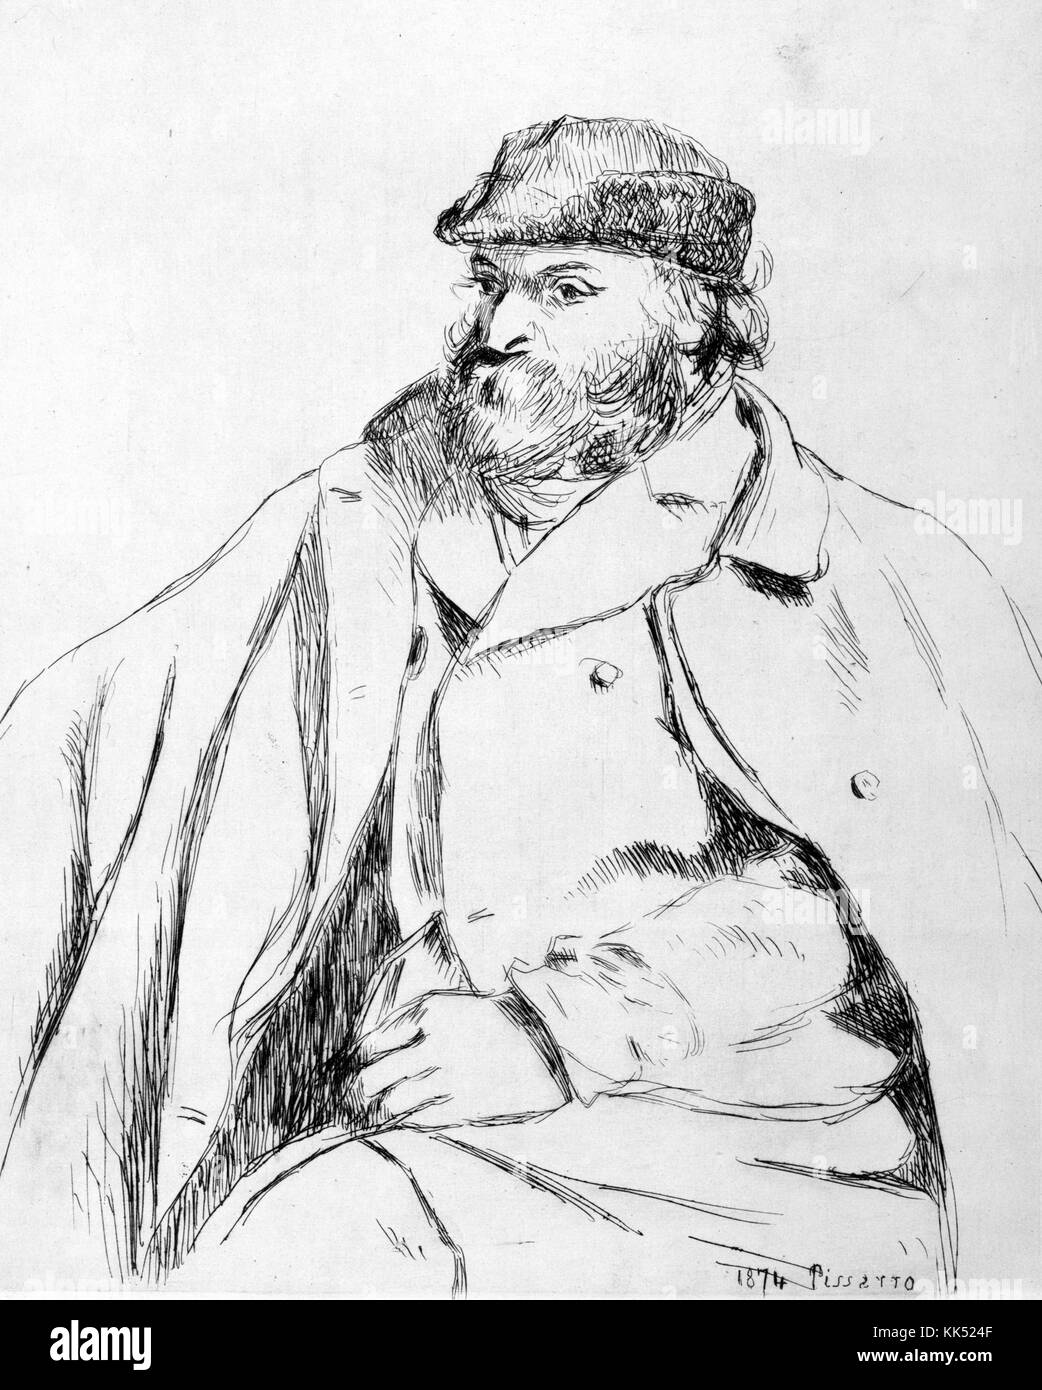 Etched portrait of Paul Cezanne, French artist and Post-Impressionist painter, sitting, wearing a hat, jacket and coat, by Camille Pissarro, 1874. From the New York Public Library. Stock Photo